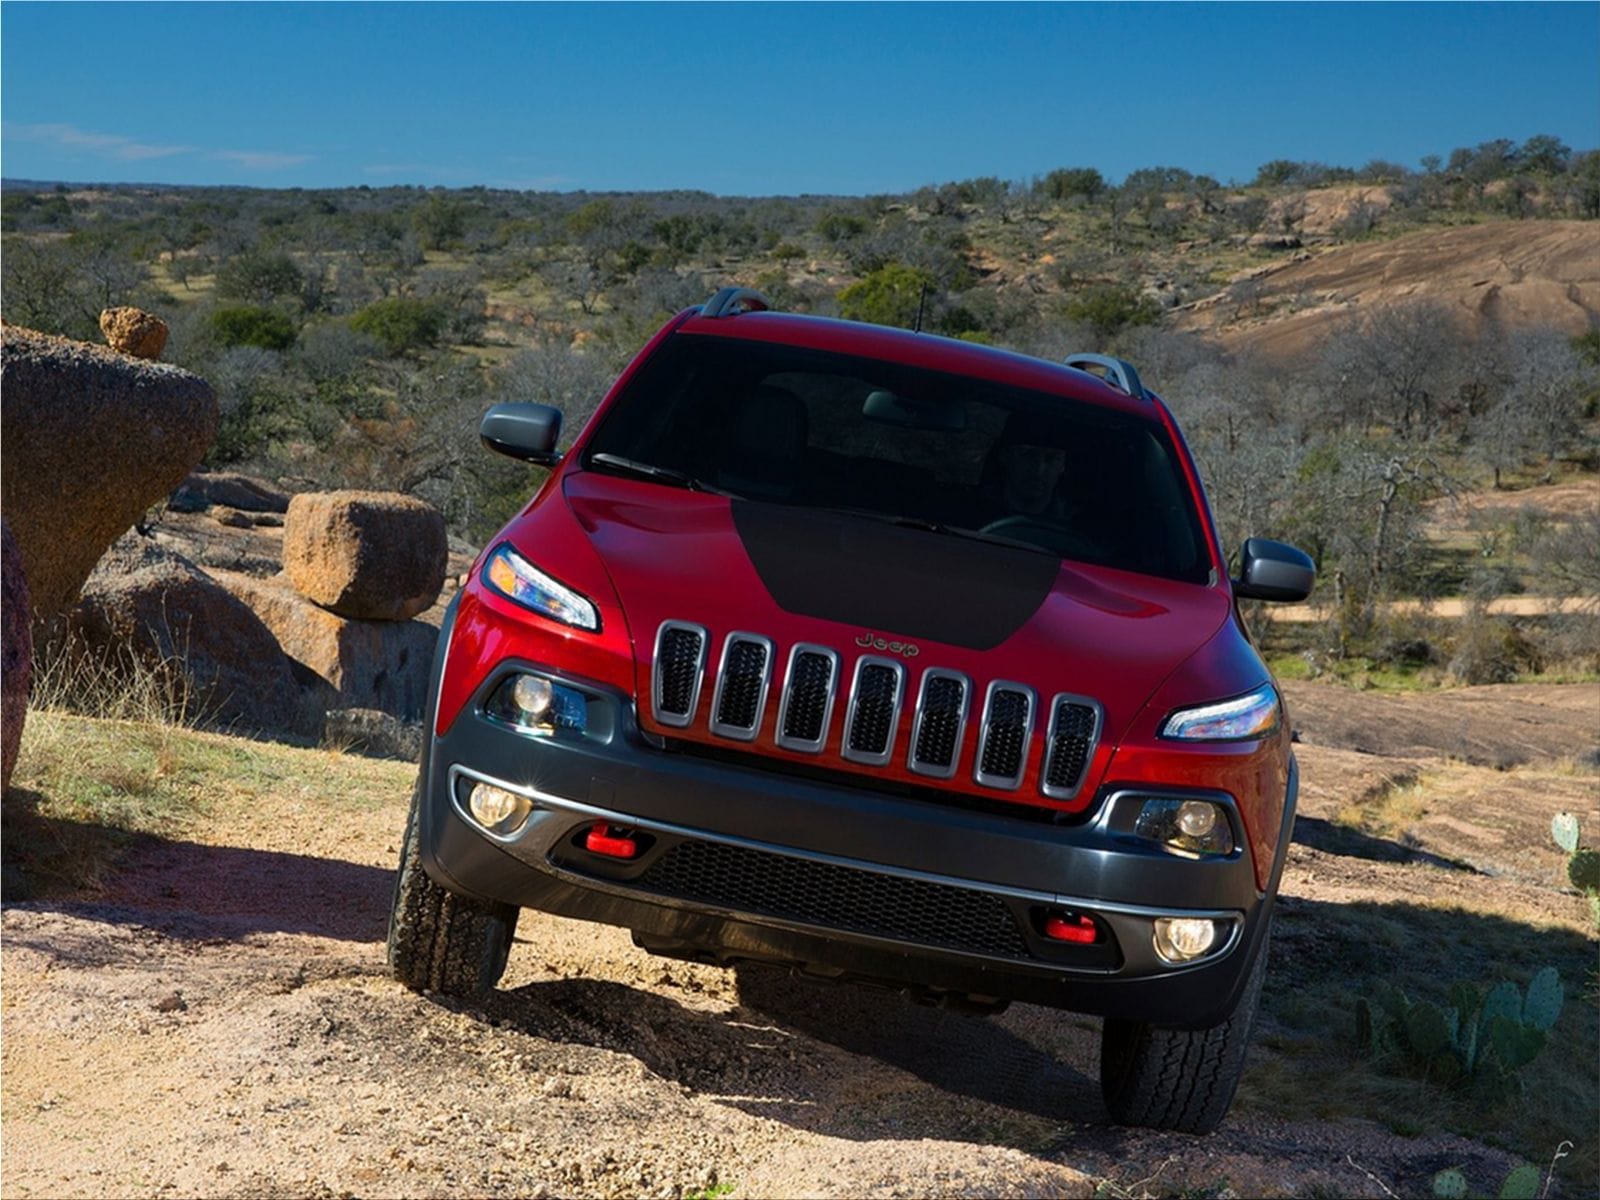 2014 Jeep Cherokee Mid Size Suv Jeep Car Pictures